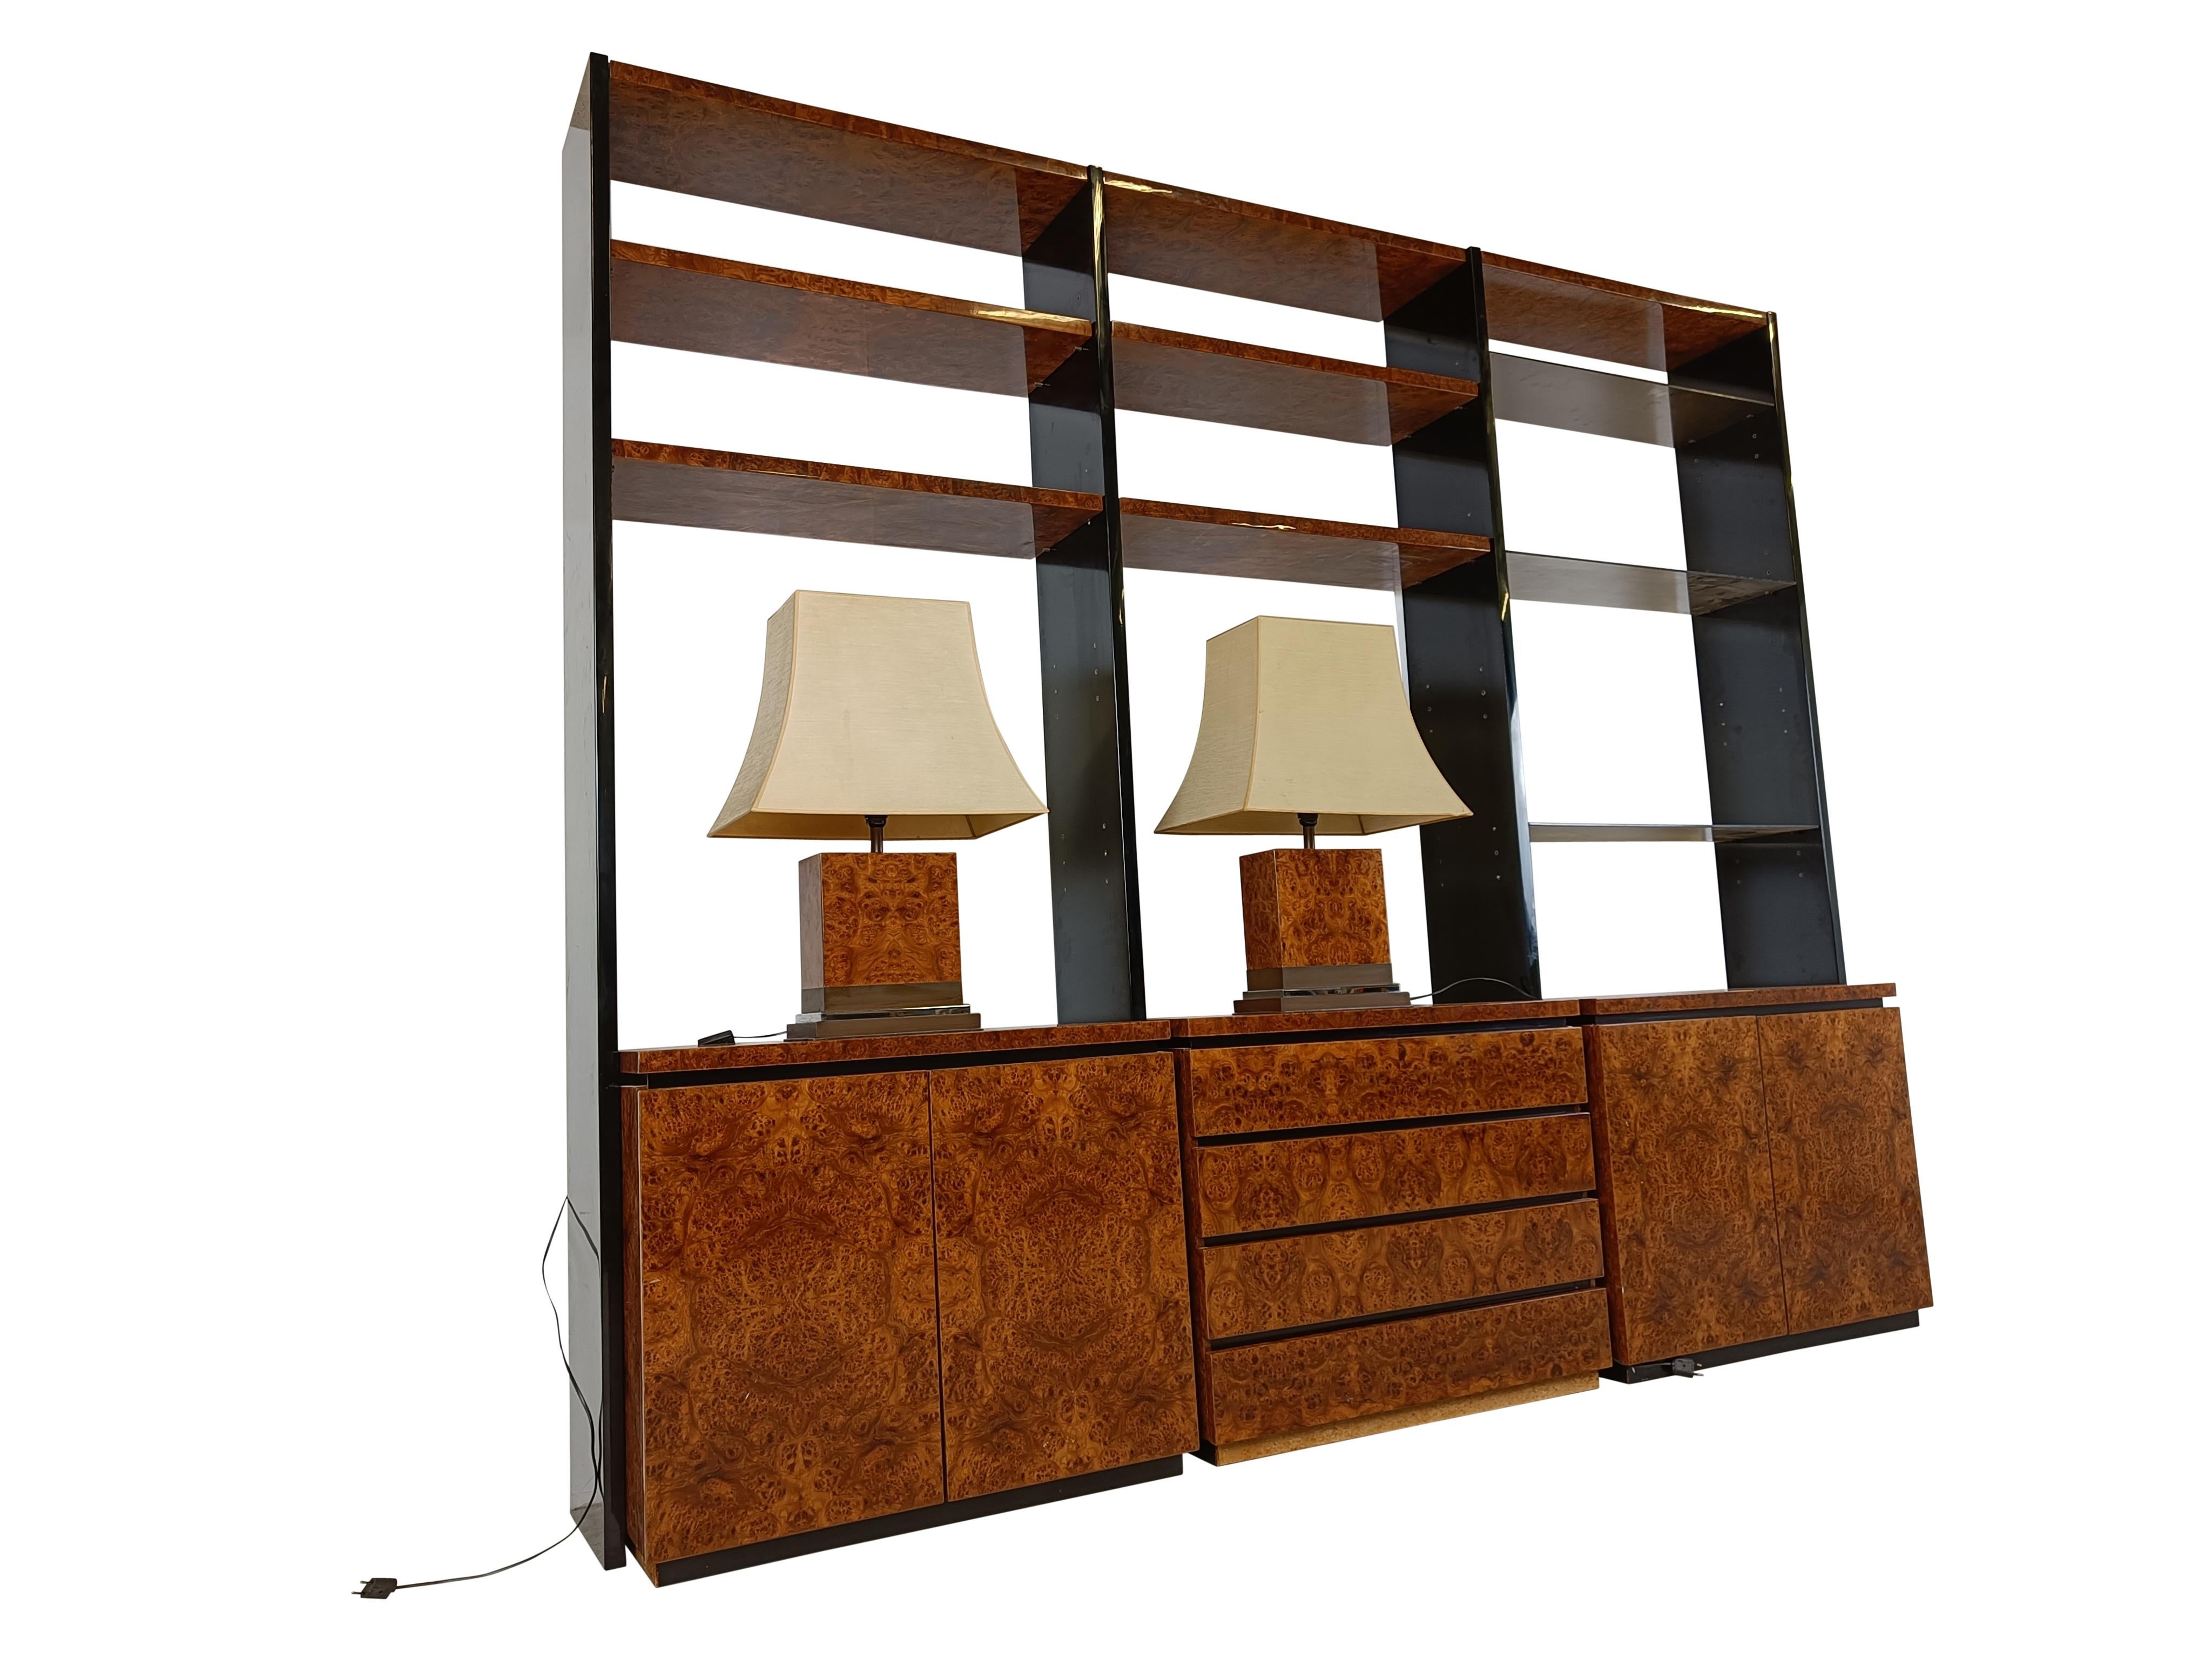 High end vintage wall unit made from burl wood and brass by jean Claude Mahey.

This very rare and luxurious wall unit consists of three cabinets, two with two doors each and one central cabinet with 4 drawers.

There are also 4 burl wood shelves